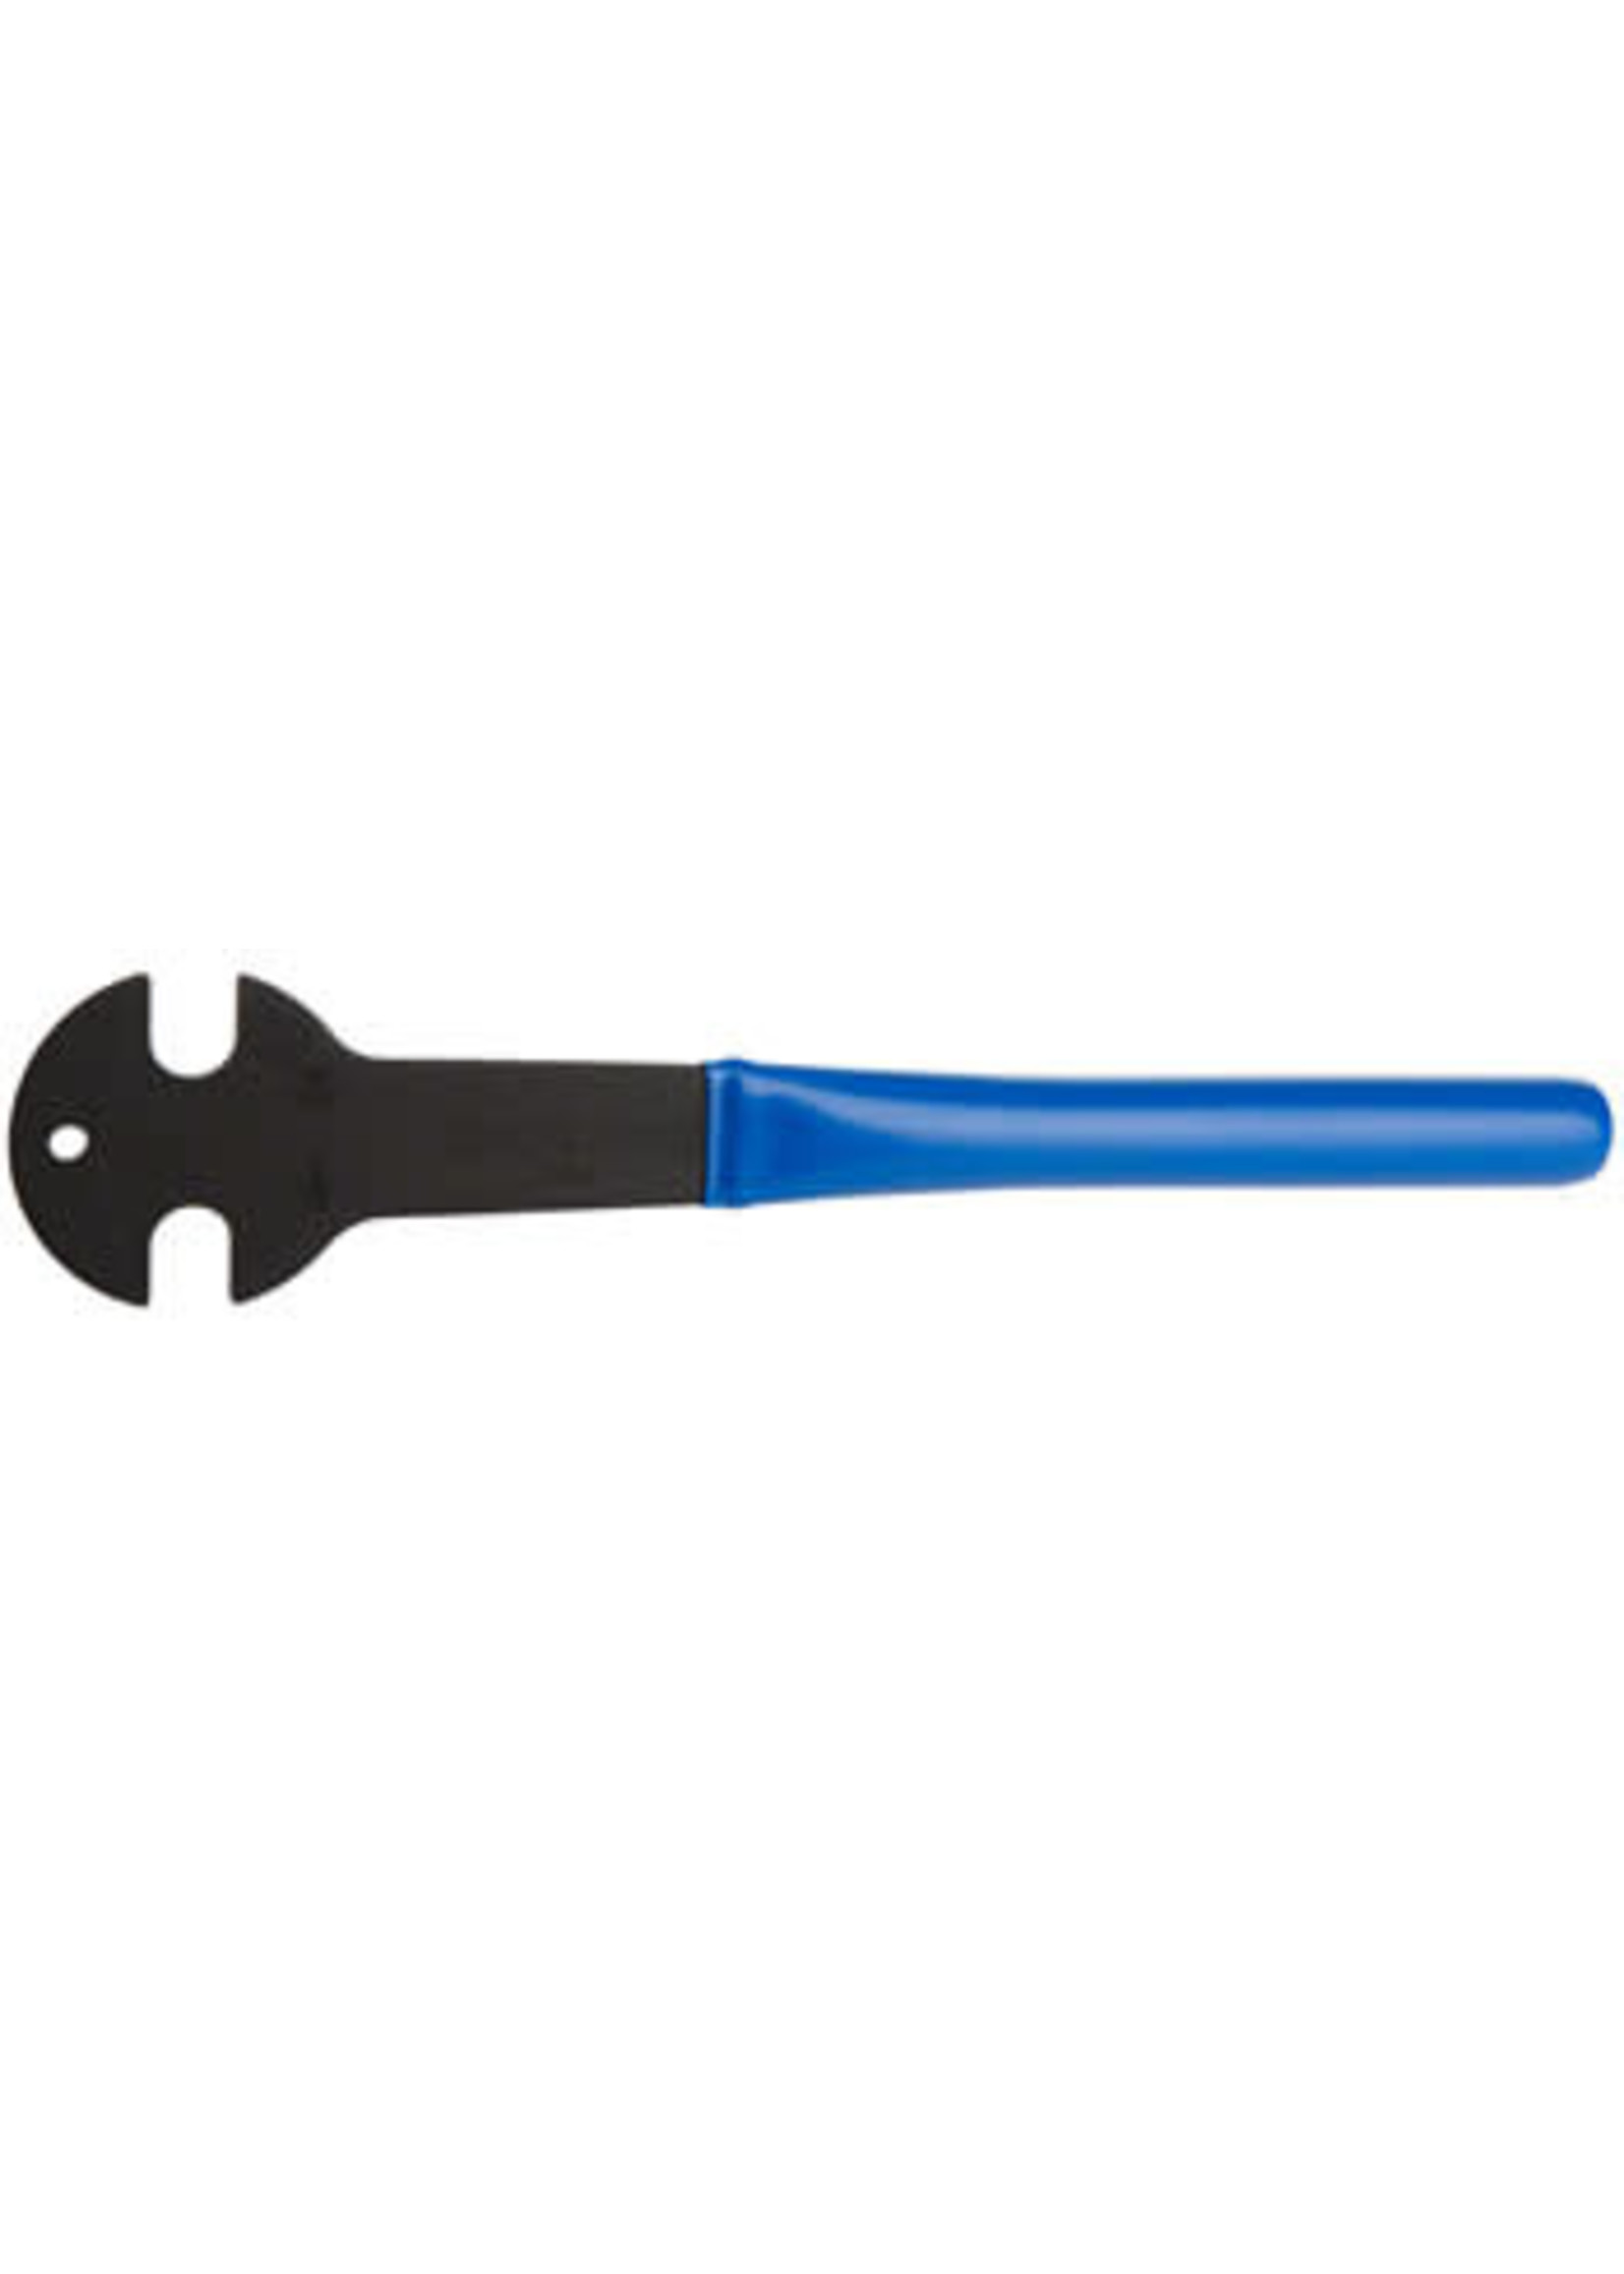 Park Tool Park Tool PW-3 15.0mm and 9/16" Pedal Wrench